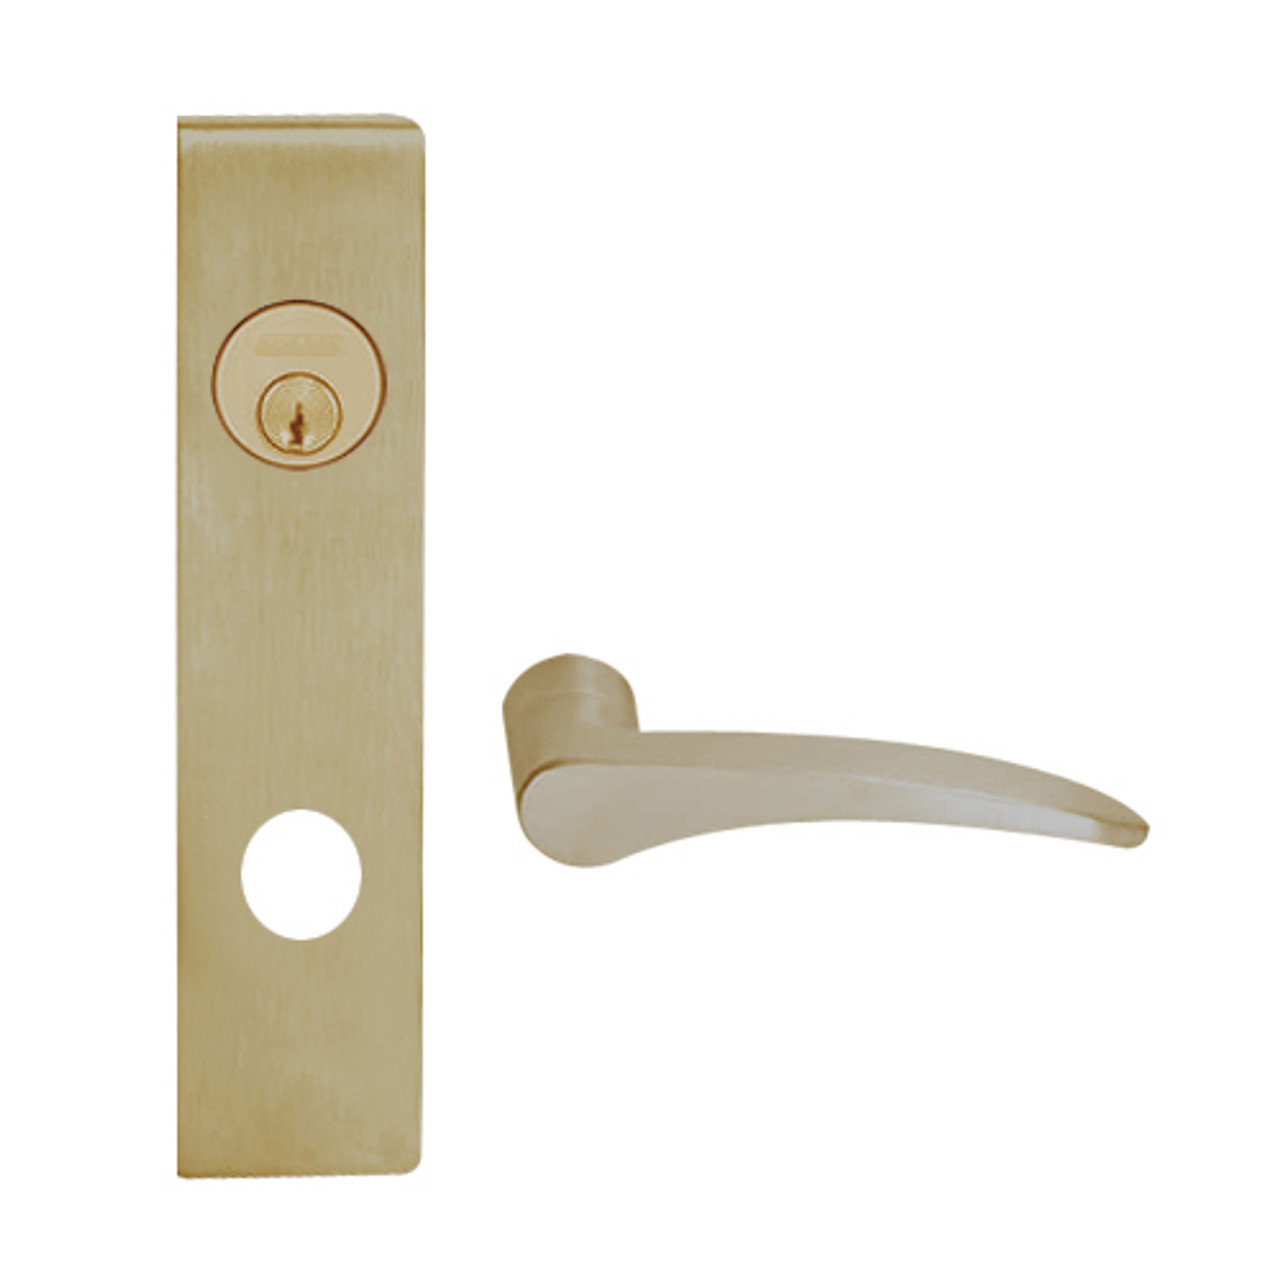 L9050L-12L-613-RH Schlage L Series Less Cylinder Entrance Commercial Mortise Lock with 12 Cast Lever Design in Oil Rubbed Bronze